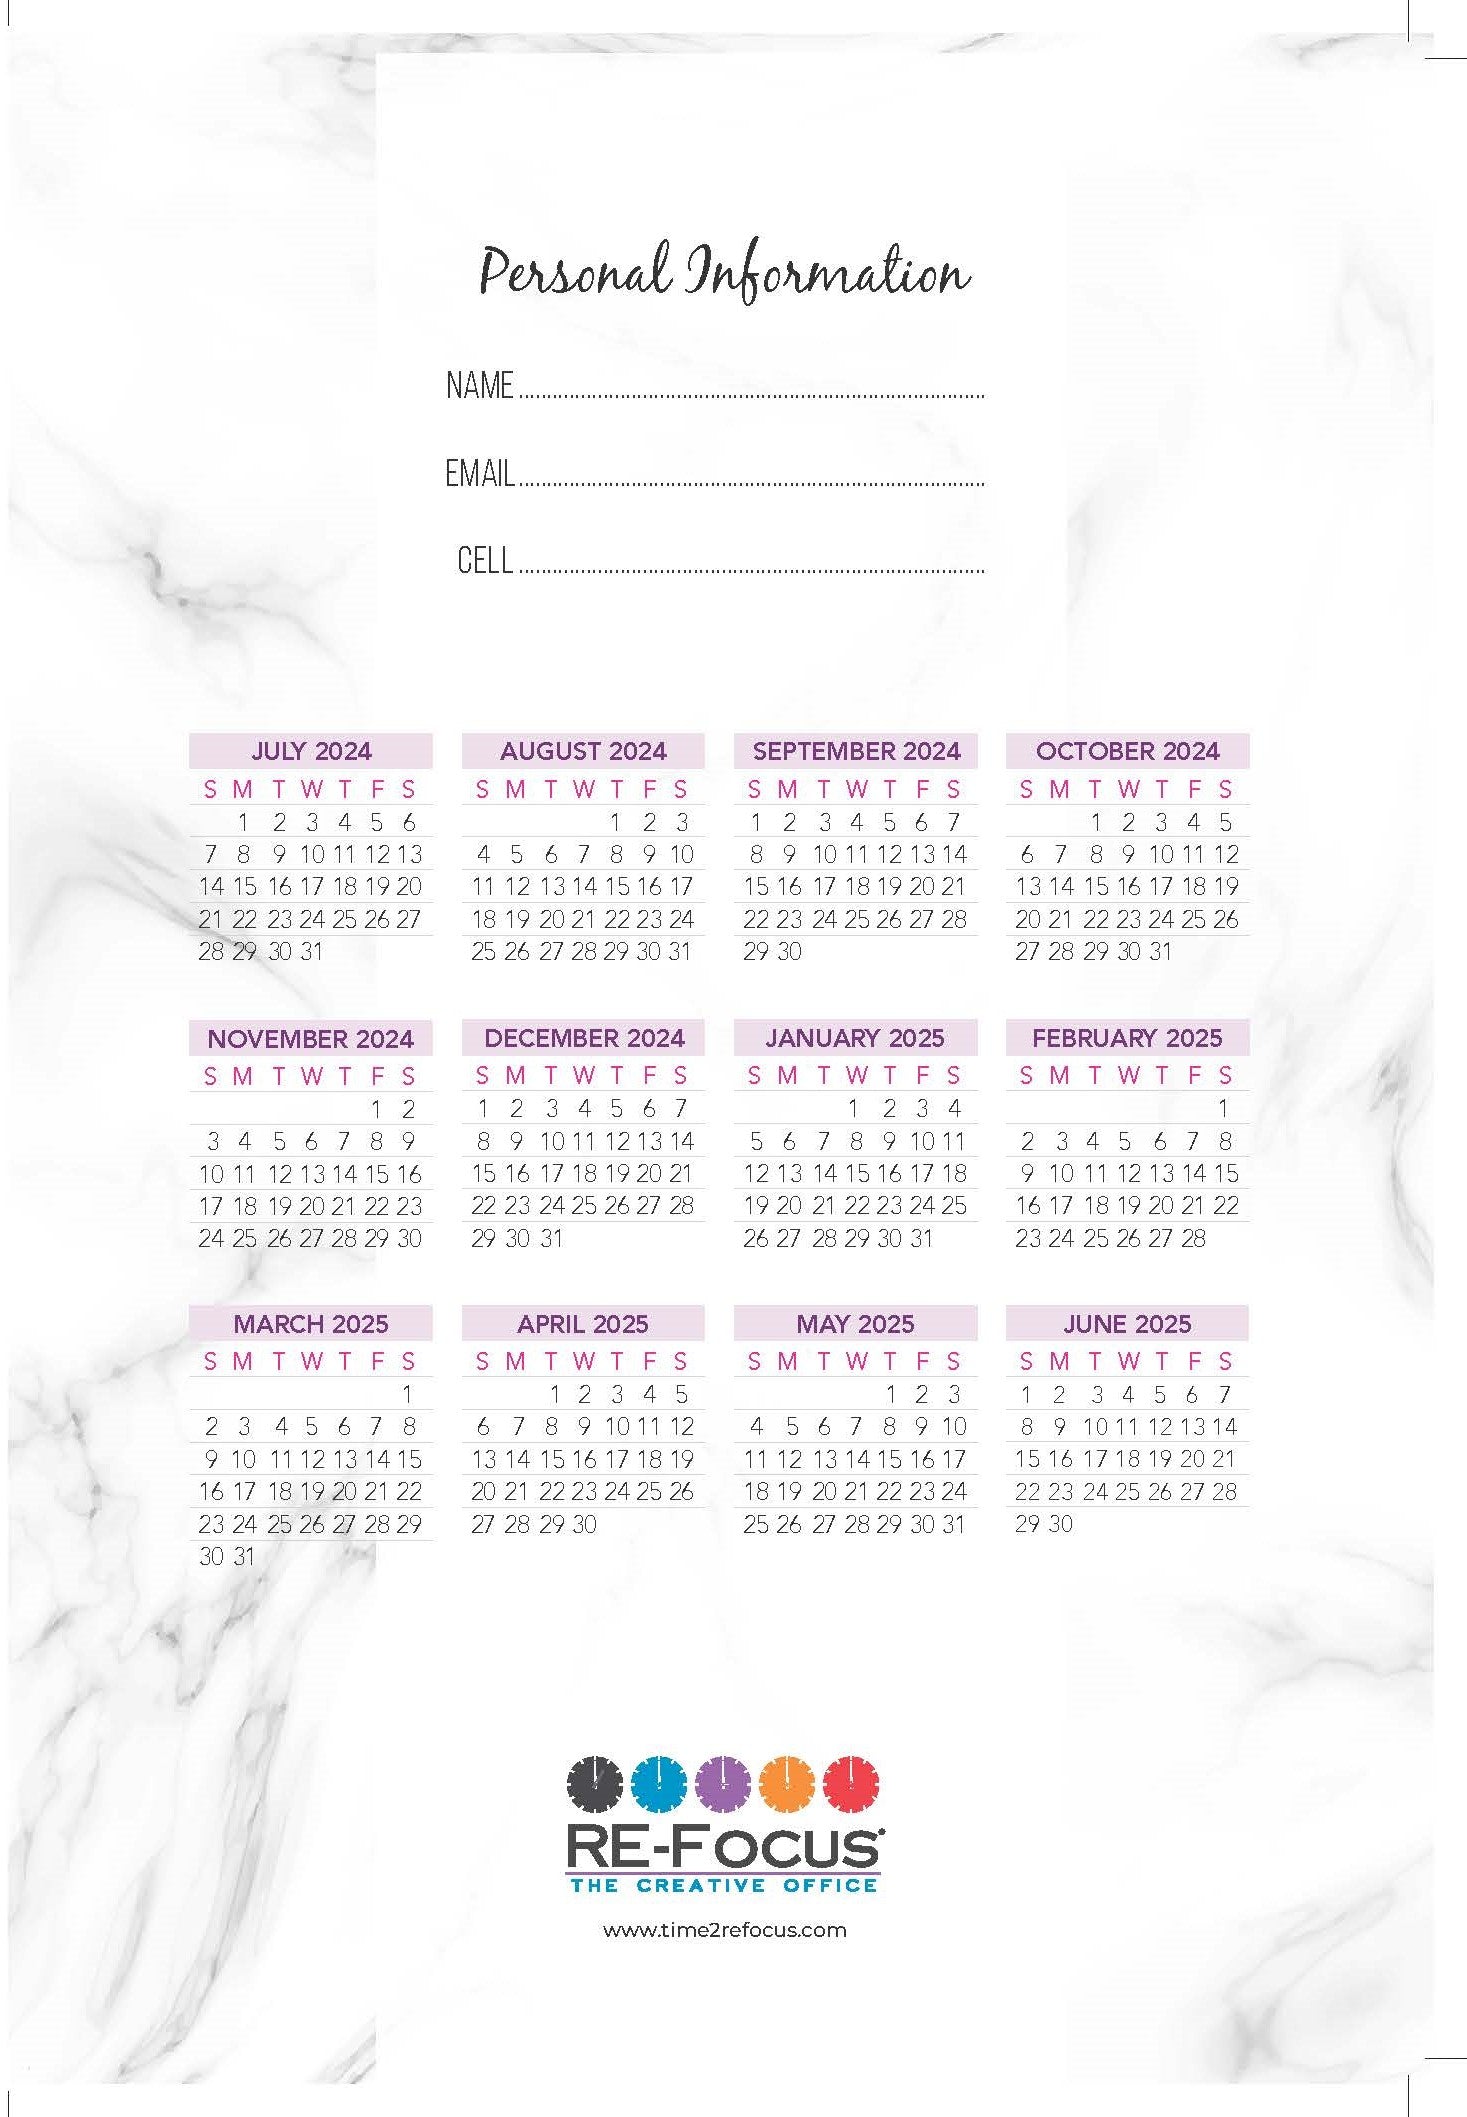 24-25 ACADEMIC CALENDARS NOW AVAILABLE! Academic Calendar, Monthly and Weekly Views with Time Slots, To-Do List